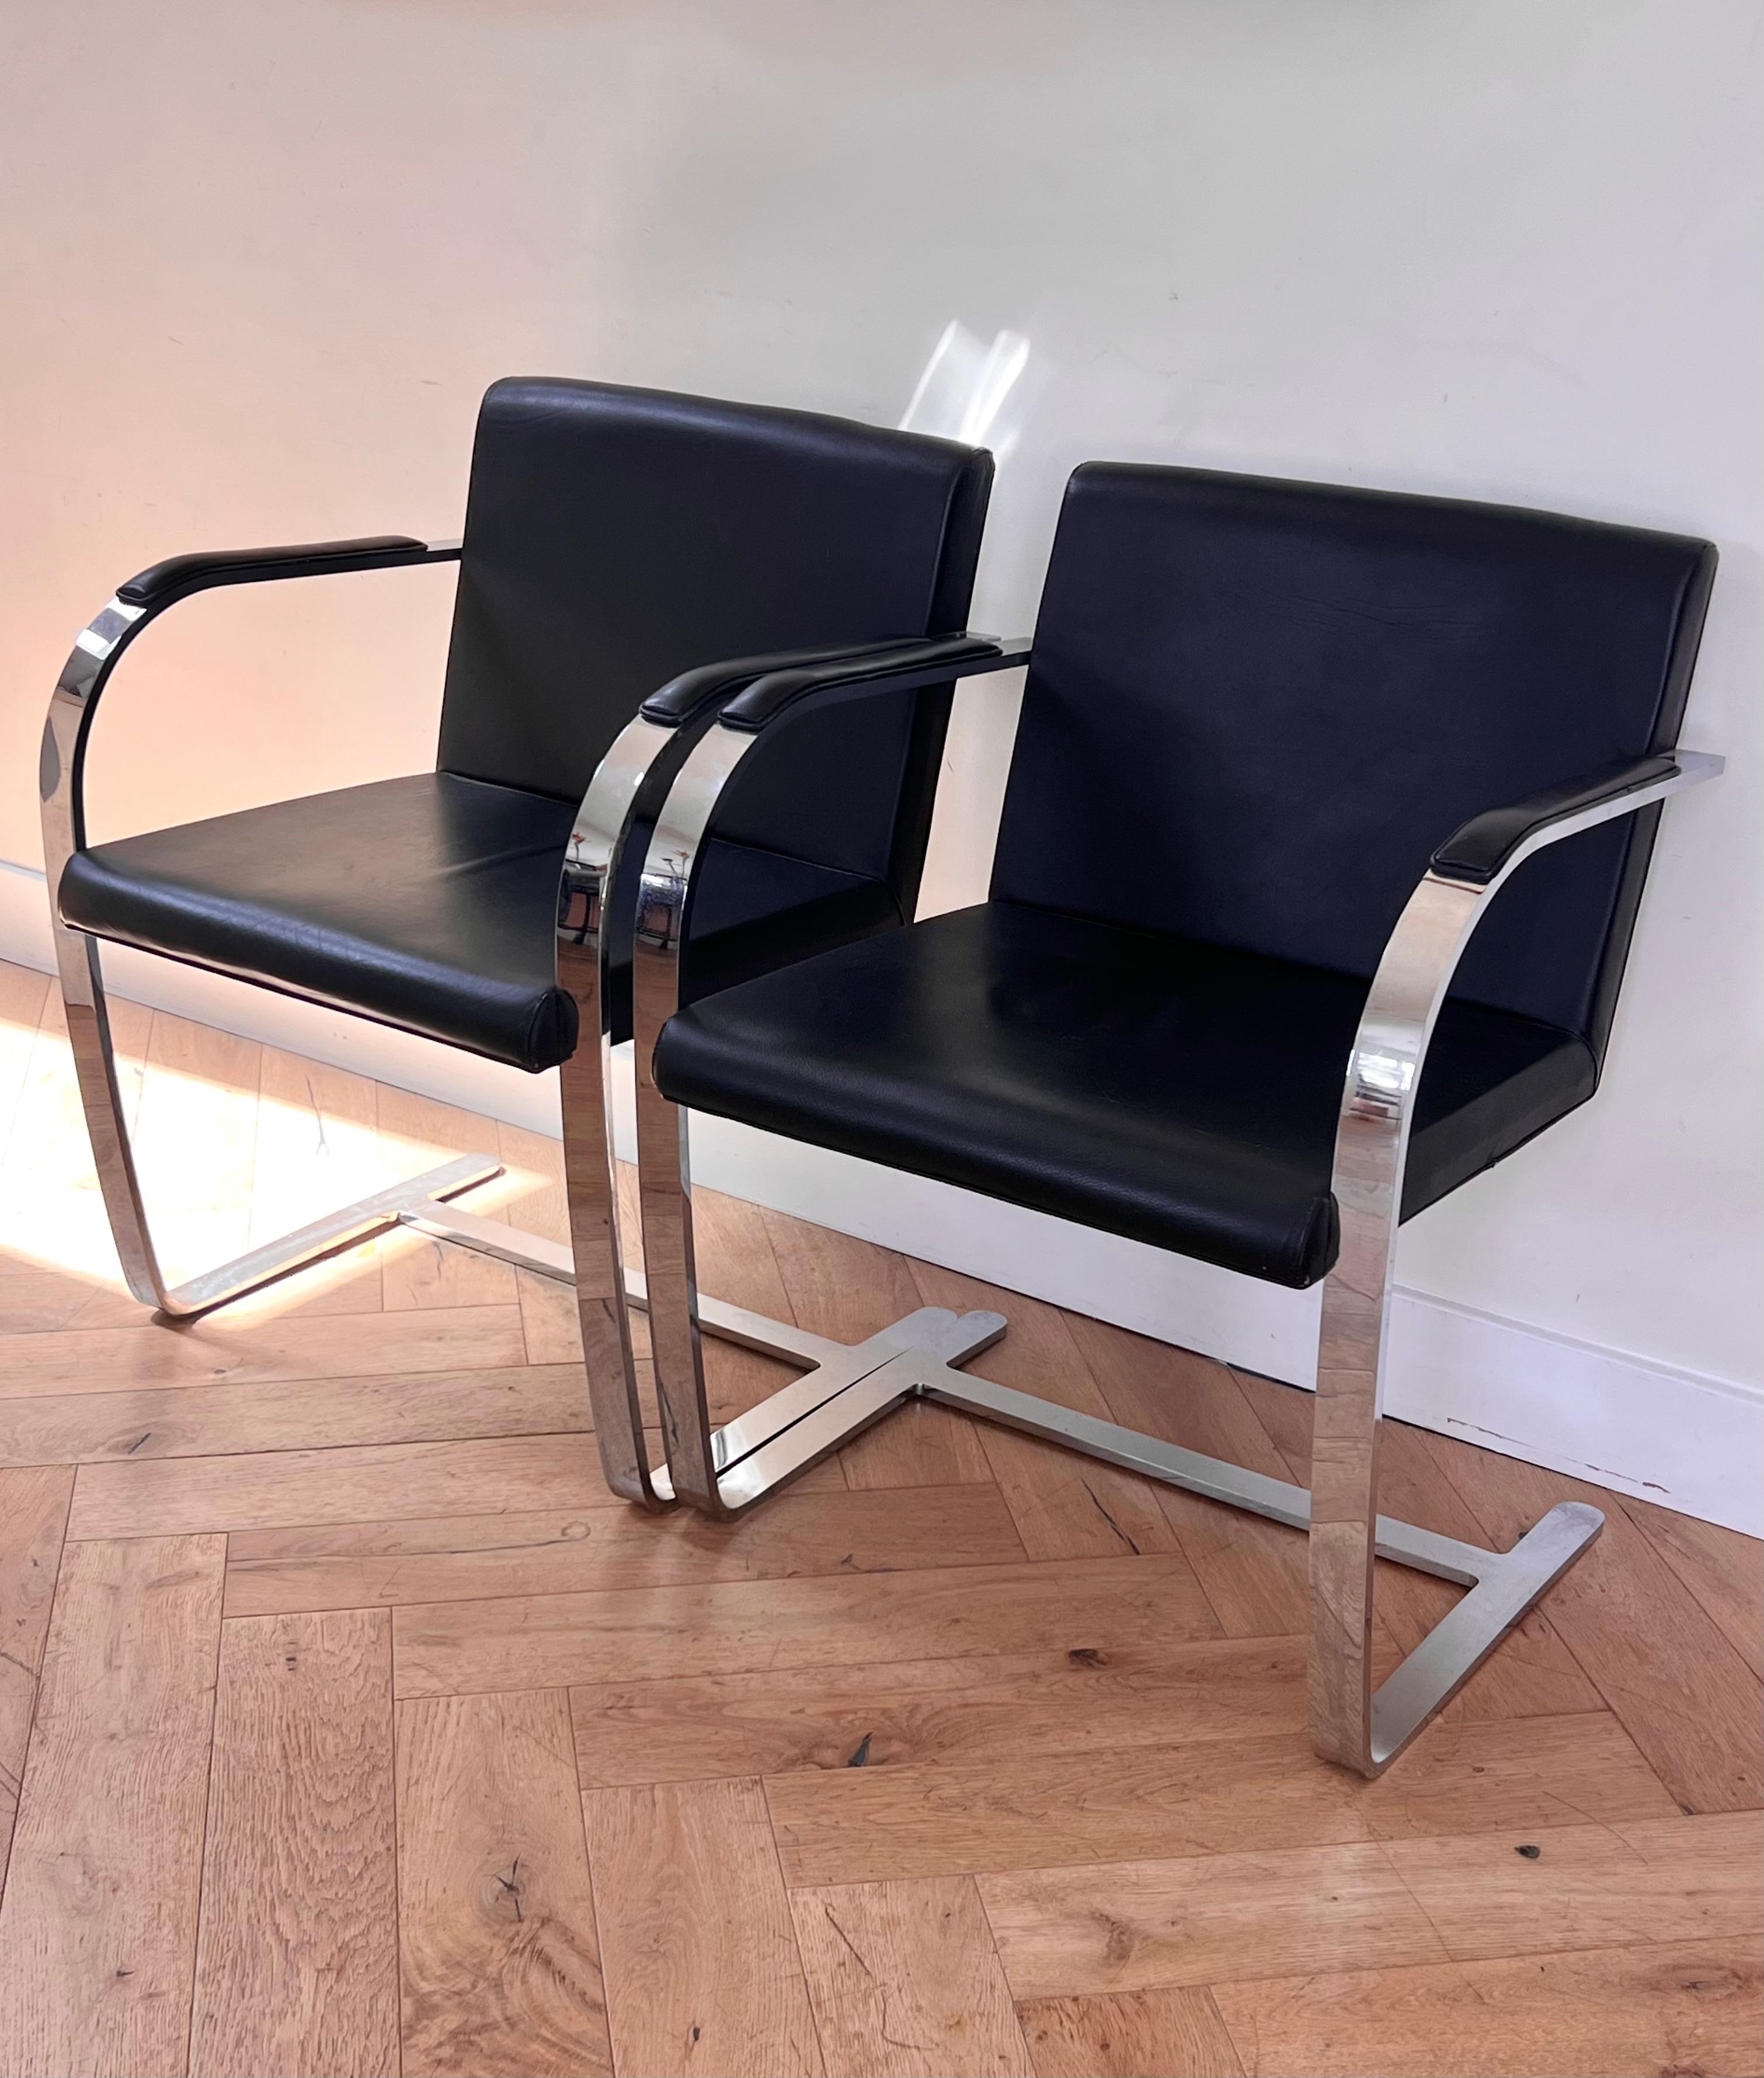 Pair of Mies van der Rohe Brno chairs by Palazzetti, 1970s For Sale 10